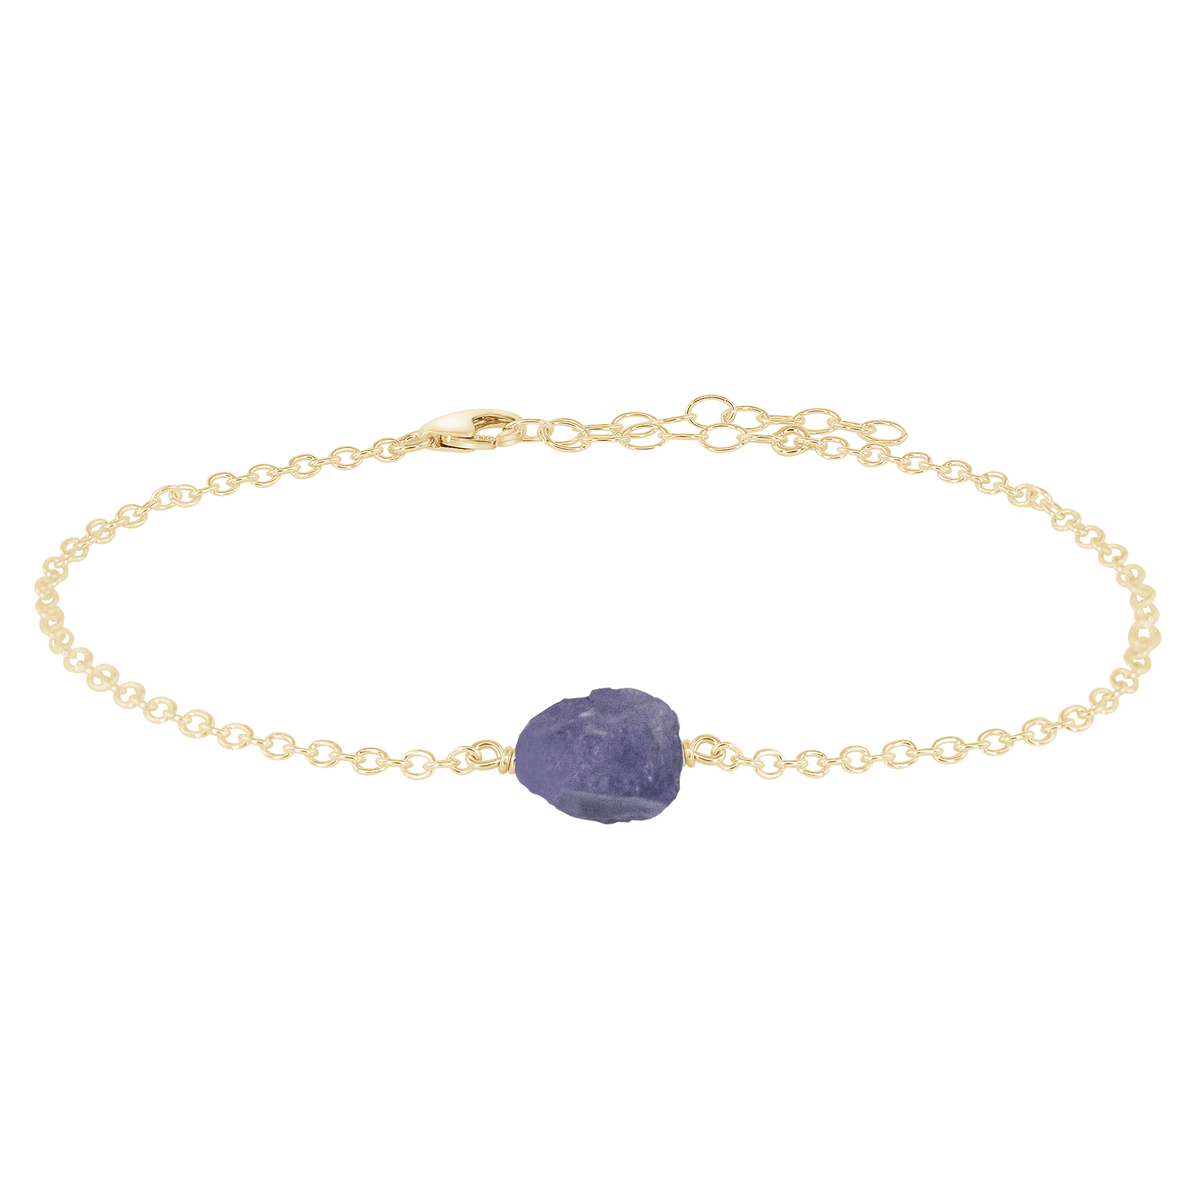 Raw Tanzanite Crystal Nugget Anklet - Raw Tanzanite Crystal Nugget Anklet - 14k Gold Fill - Luna Tide Handmade Crystal Jewellery